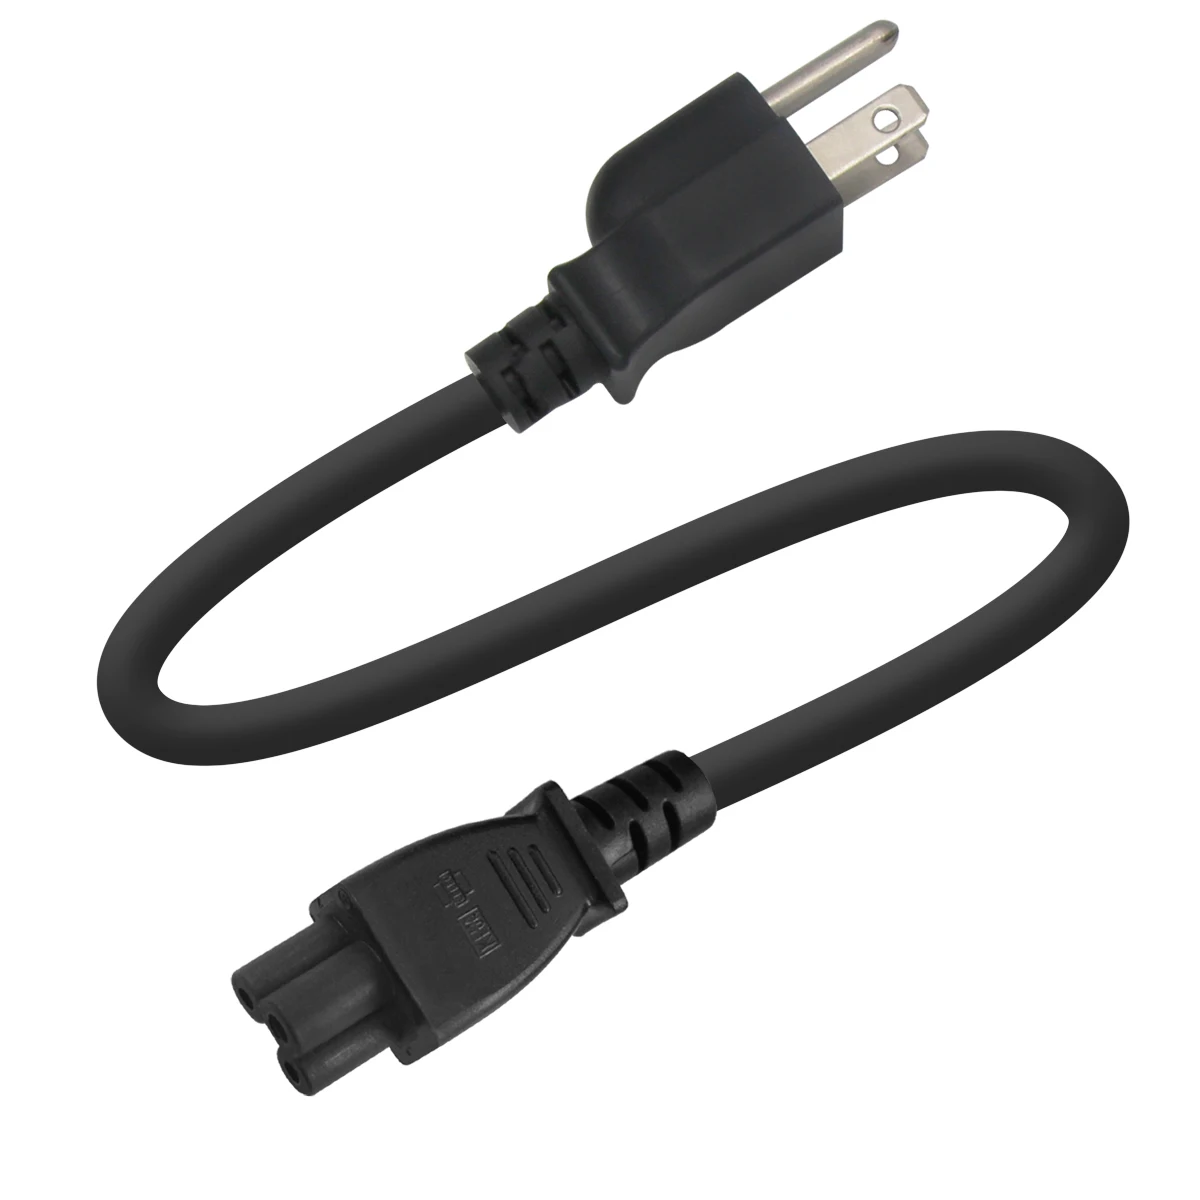 SJT 14 16AWG ac extension Cable PVC black us male to female Nema5-15P splitter y type power cord 19